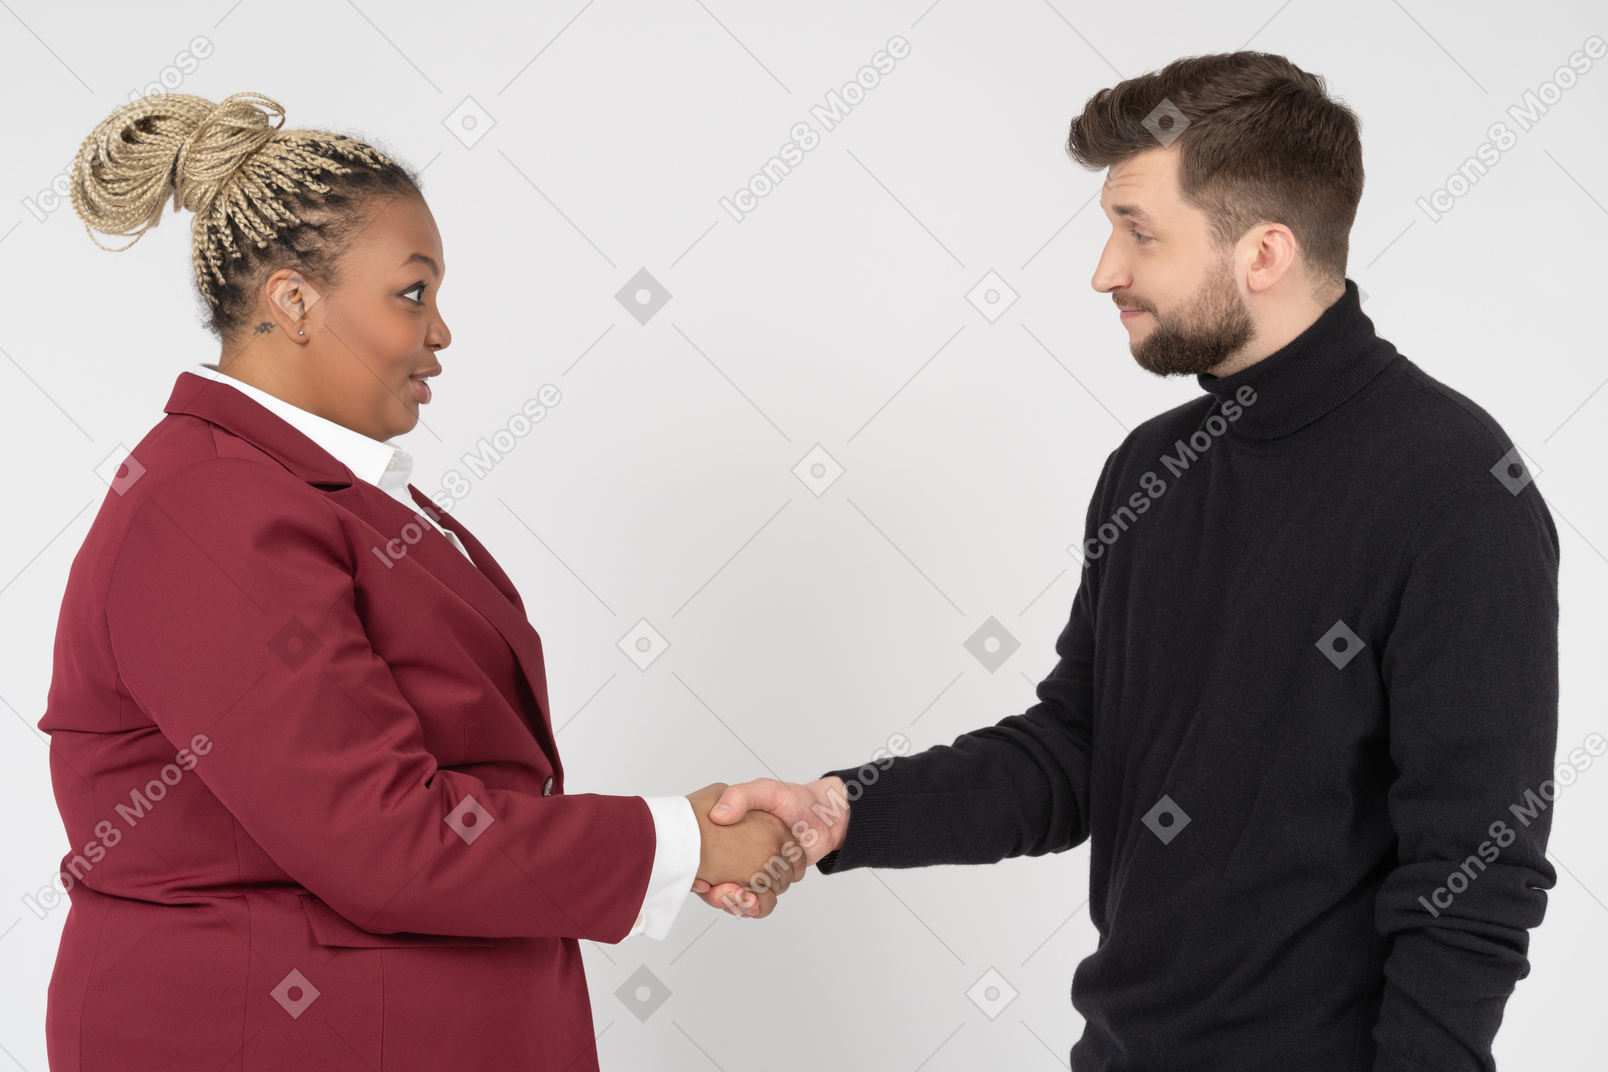 Office workers greeting each other with a handshake